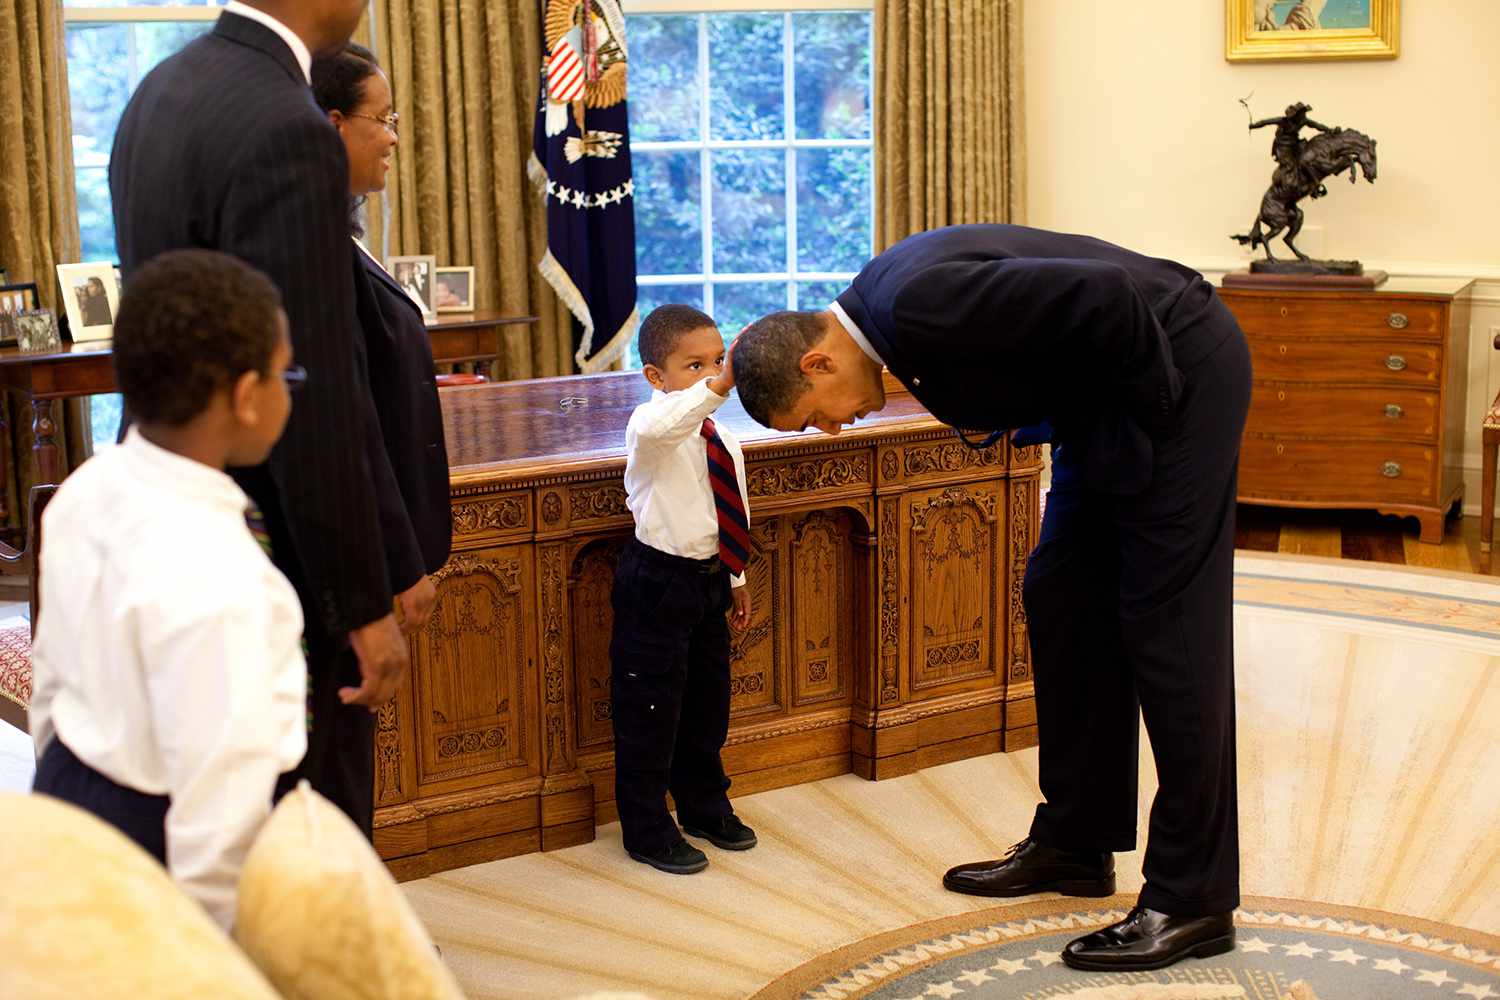 Barack Obama reunites with boy from viral ‘Hair Like Mine’ picture